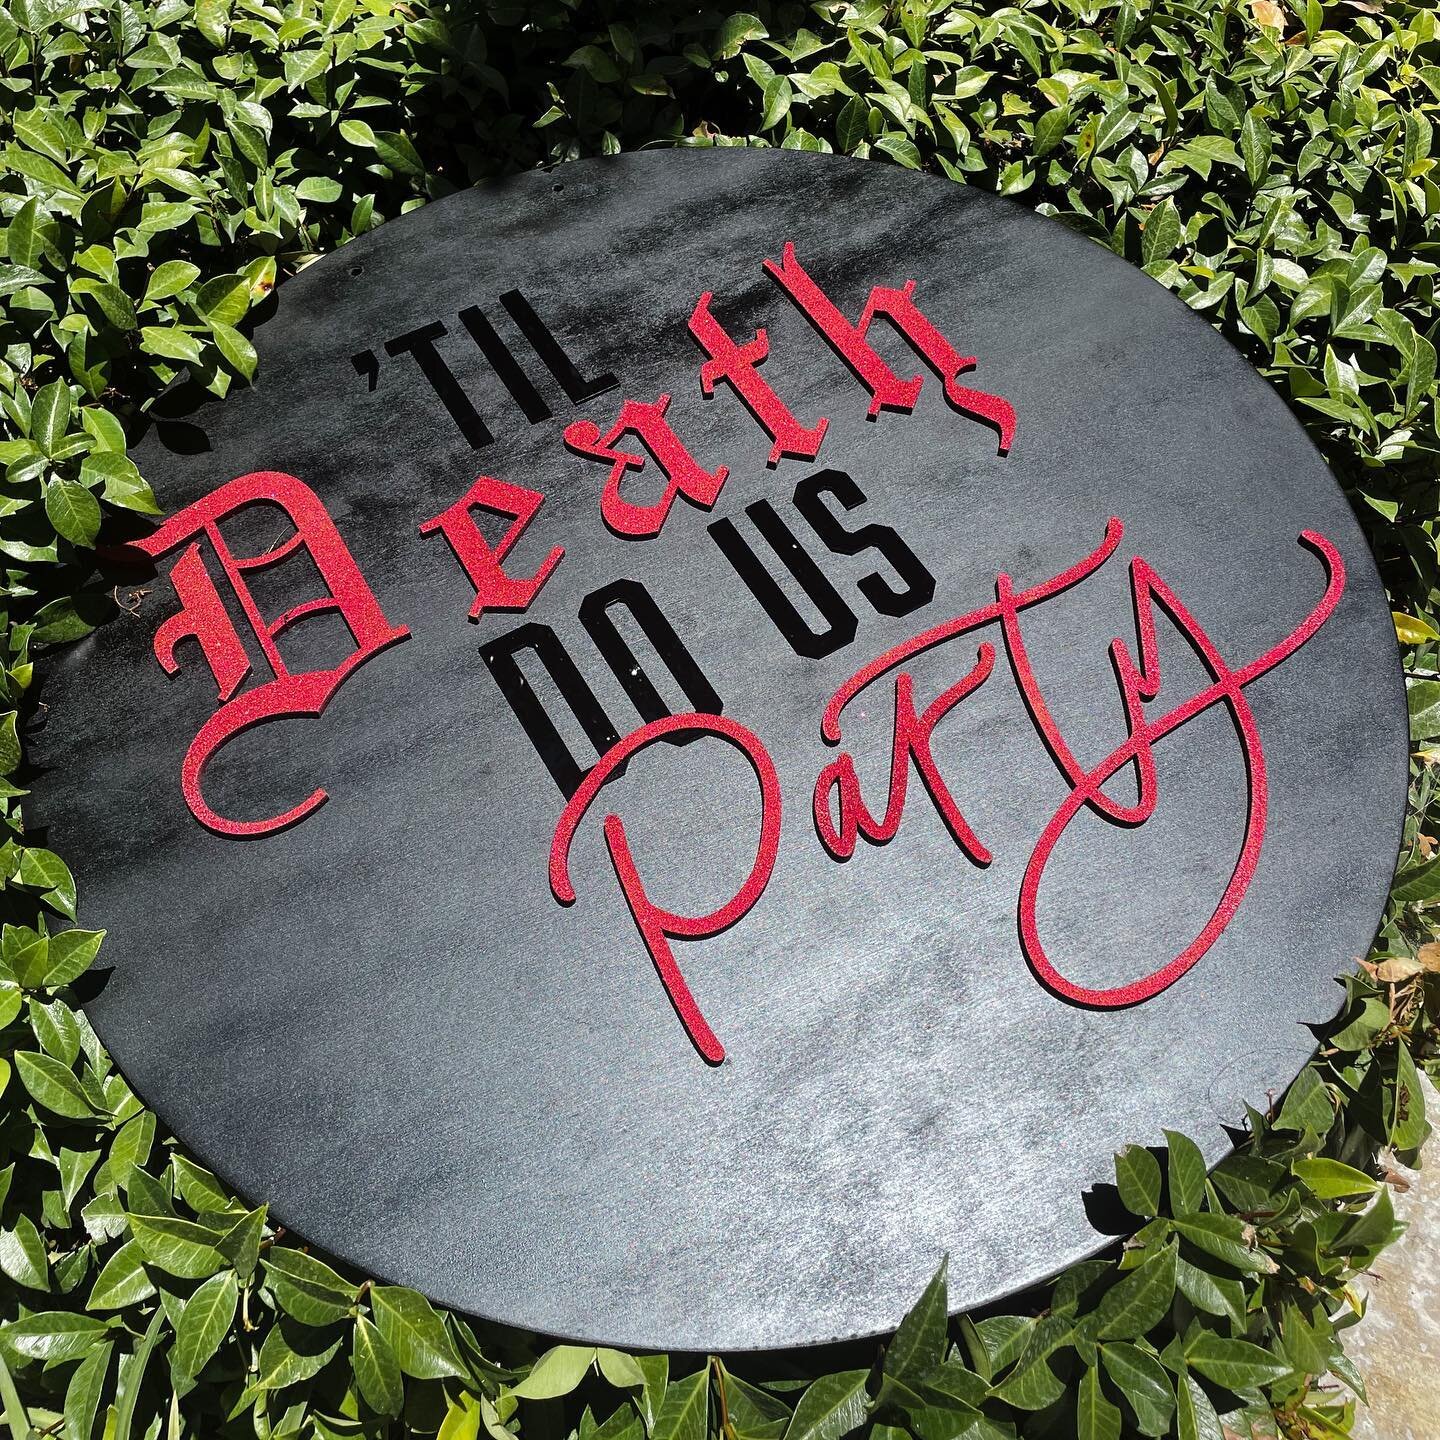 something a lil different than my normal style but when a client asks for signage for a &ldquo;death to my 20s&rdquo; party we glam it all the way up! ☠️❤️ she wanted a statement piece for her backdrop so we got a 30&rdquo; wooden circle and sprayed 